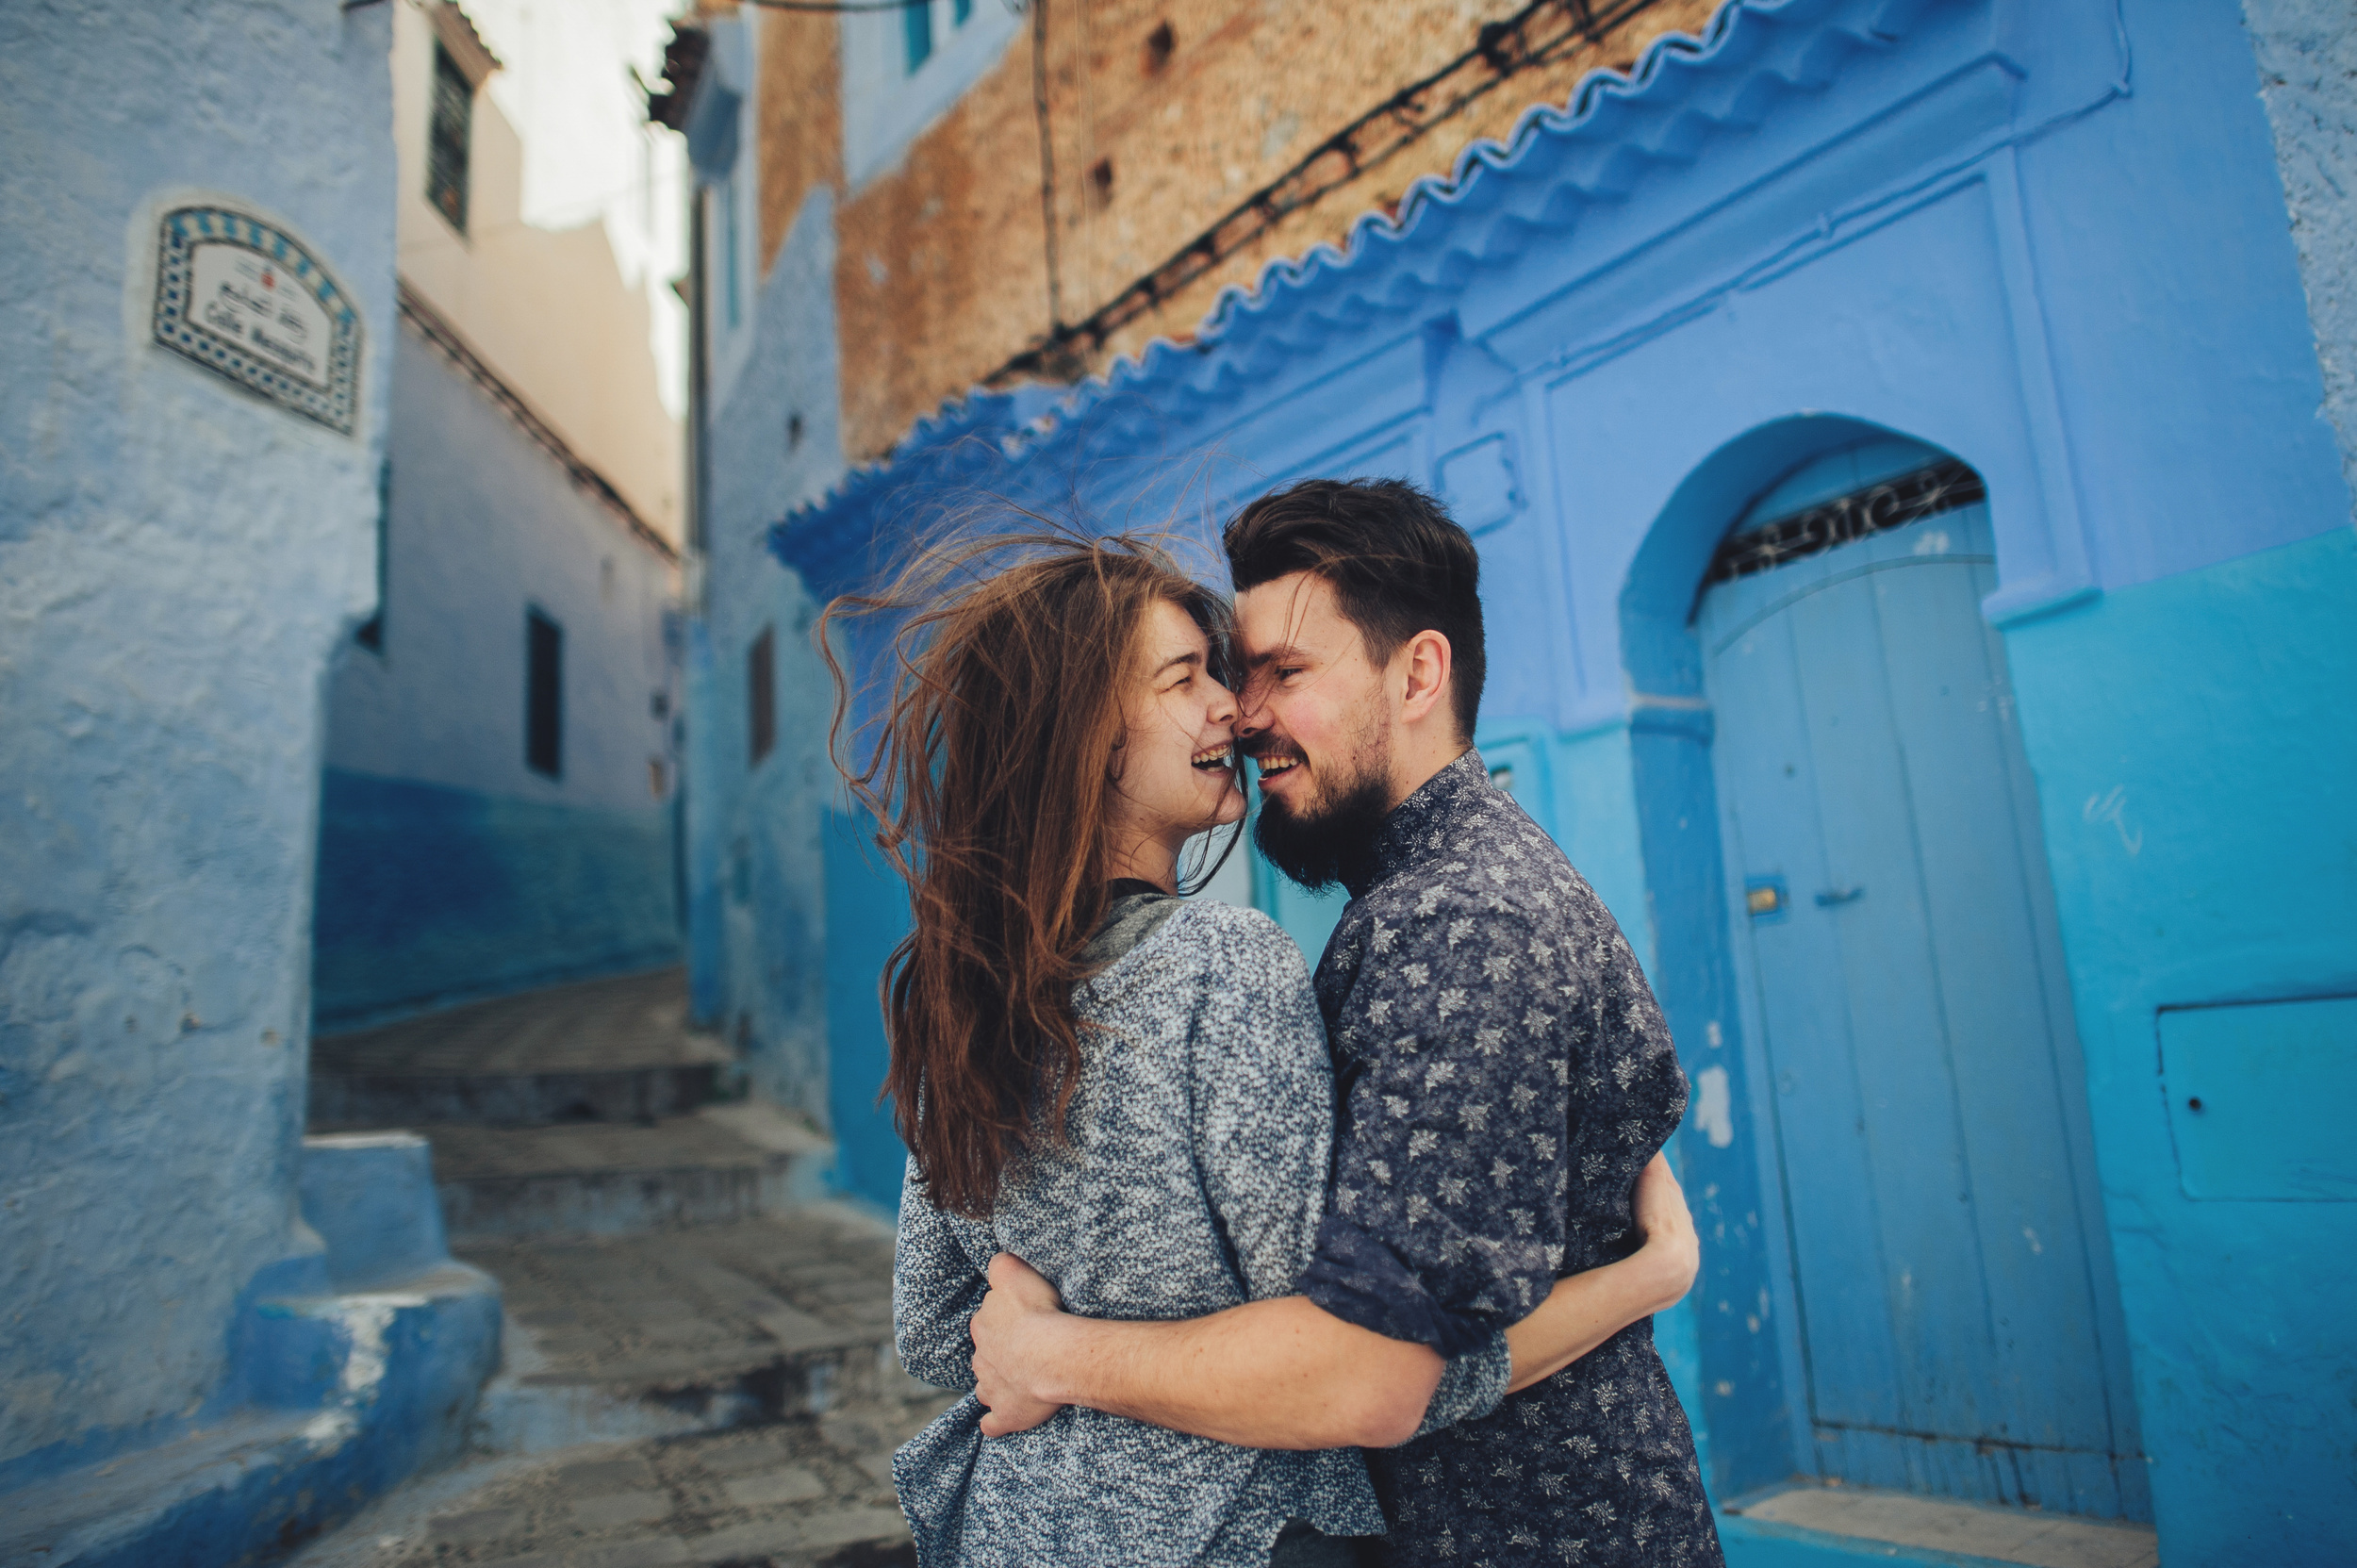 <p>This beach town on Morocco’s Atlantic coast is a magical respite for you and your special someone. Wander the colorful Medina, eat at some of the country’s most underrated restaurants, or go horseback riding on the shore.</p><p><a href='https://www.msn.com/en-us/community/channel/vid-cj9pqbr0vn9in2b6ddcd8sfgpfq6x6utp44fssrv6mc2gtybw0us'>Follow us on MSN to see more of our exclusive lifestyle content.</a></p>